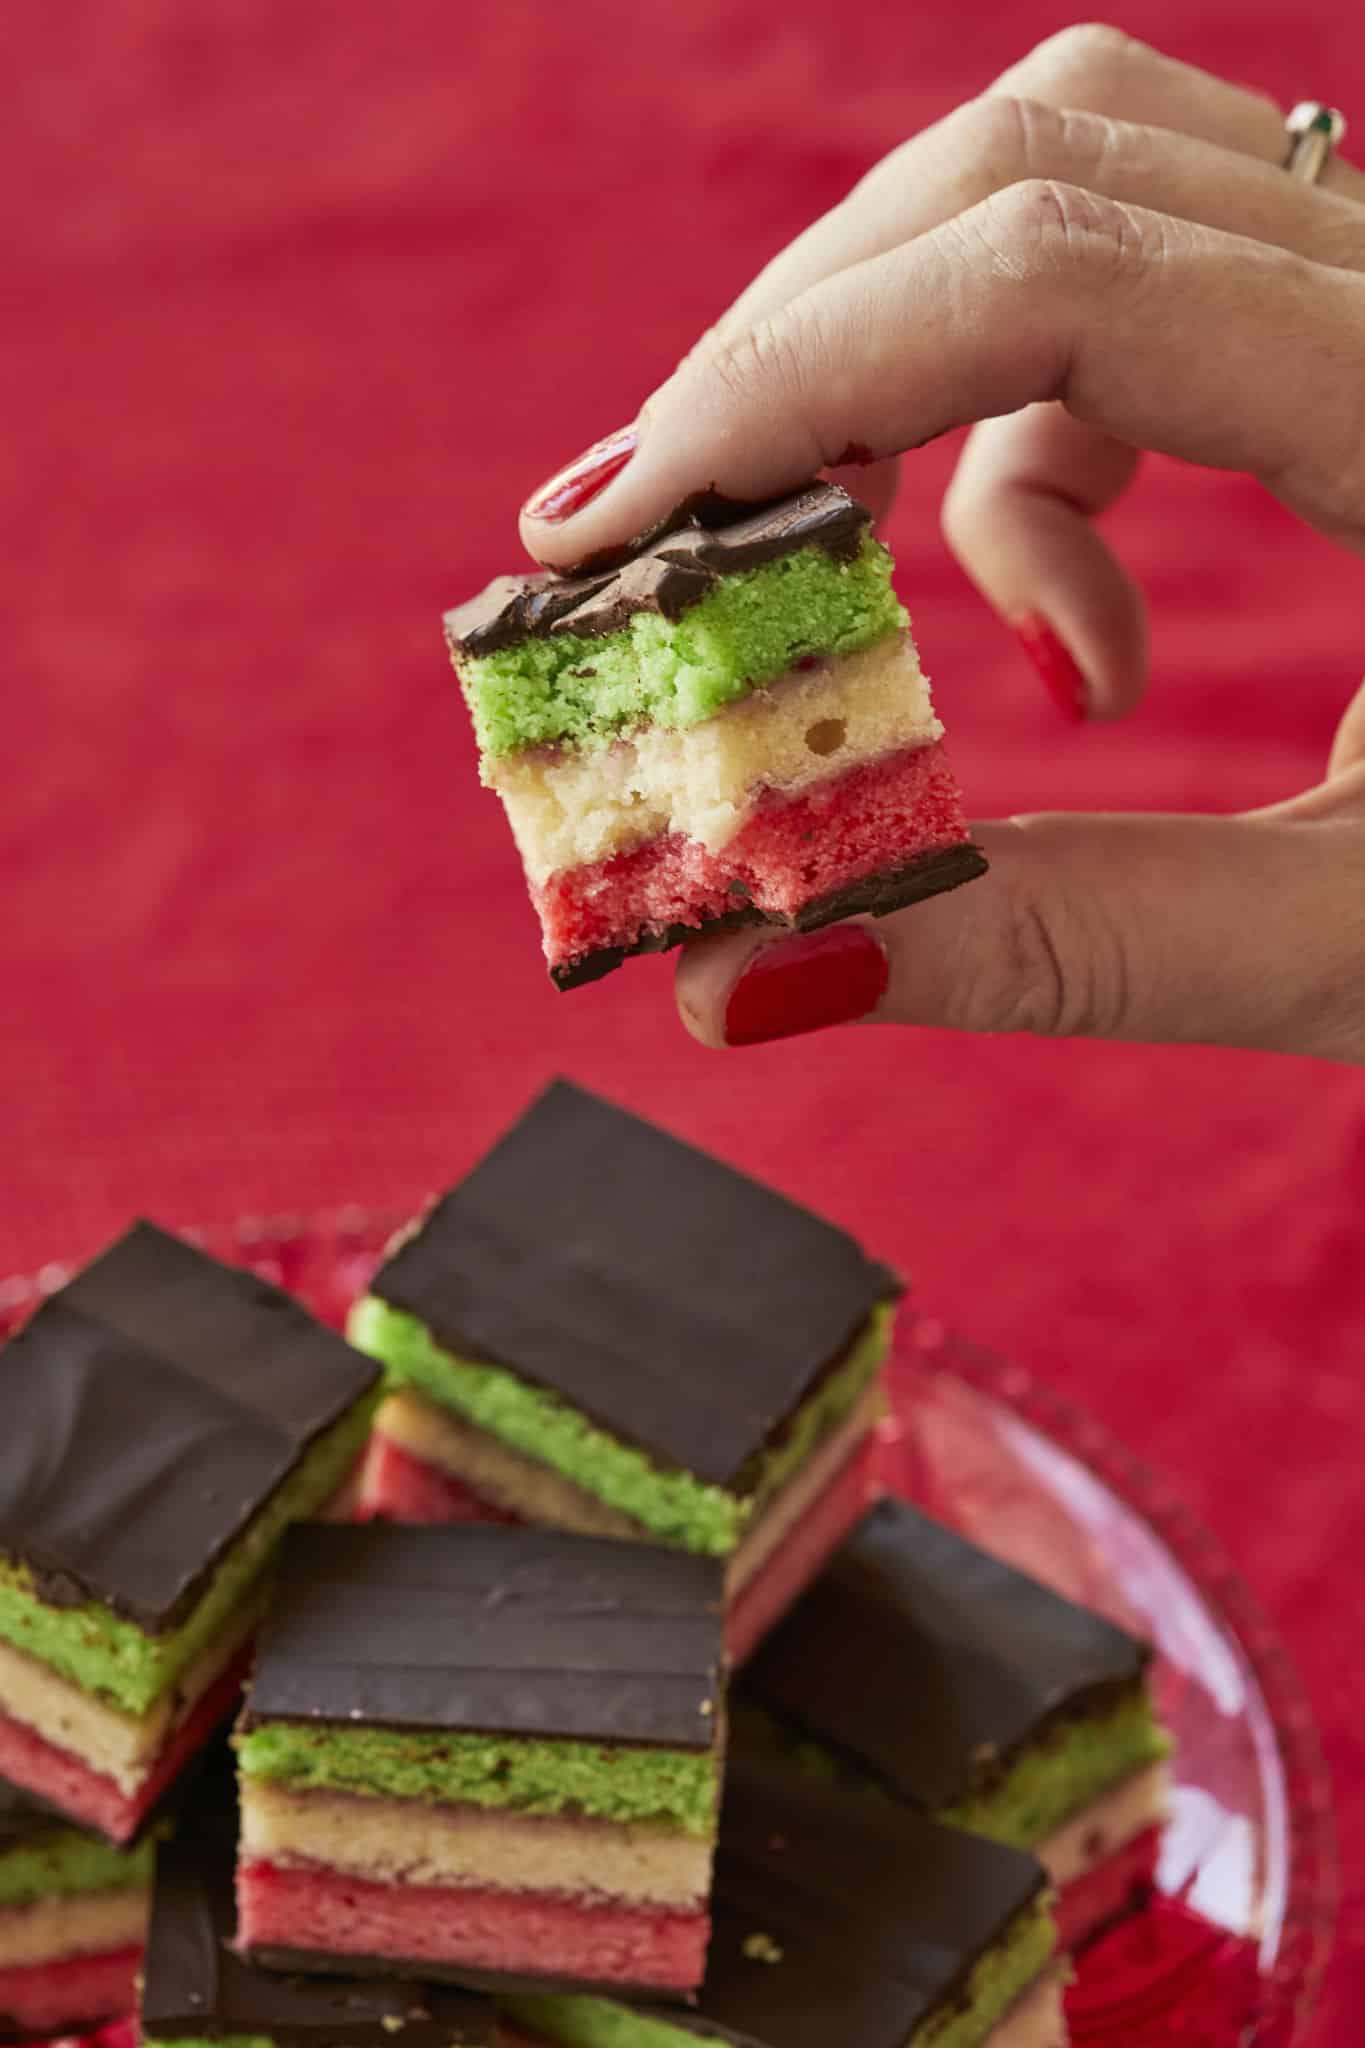 A bite is taken out of one Rainbow Cookie, showing the tricolor structure. In between the layers of cake is raspberry jam.